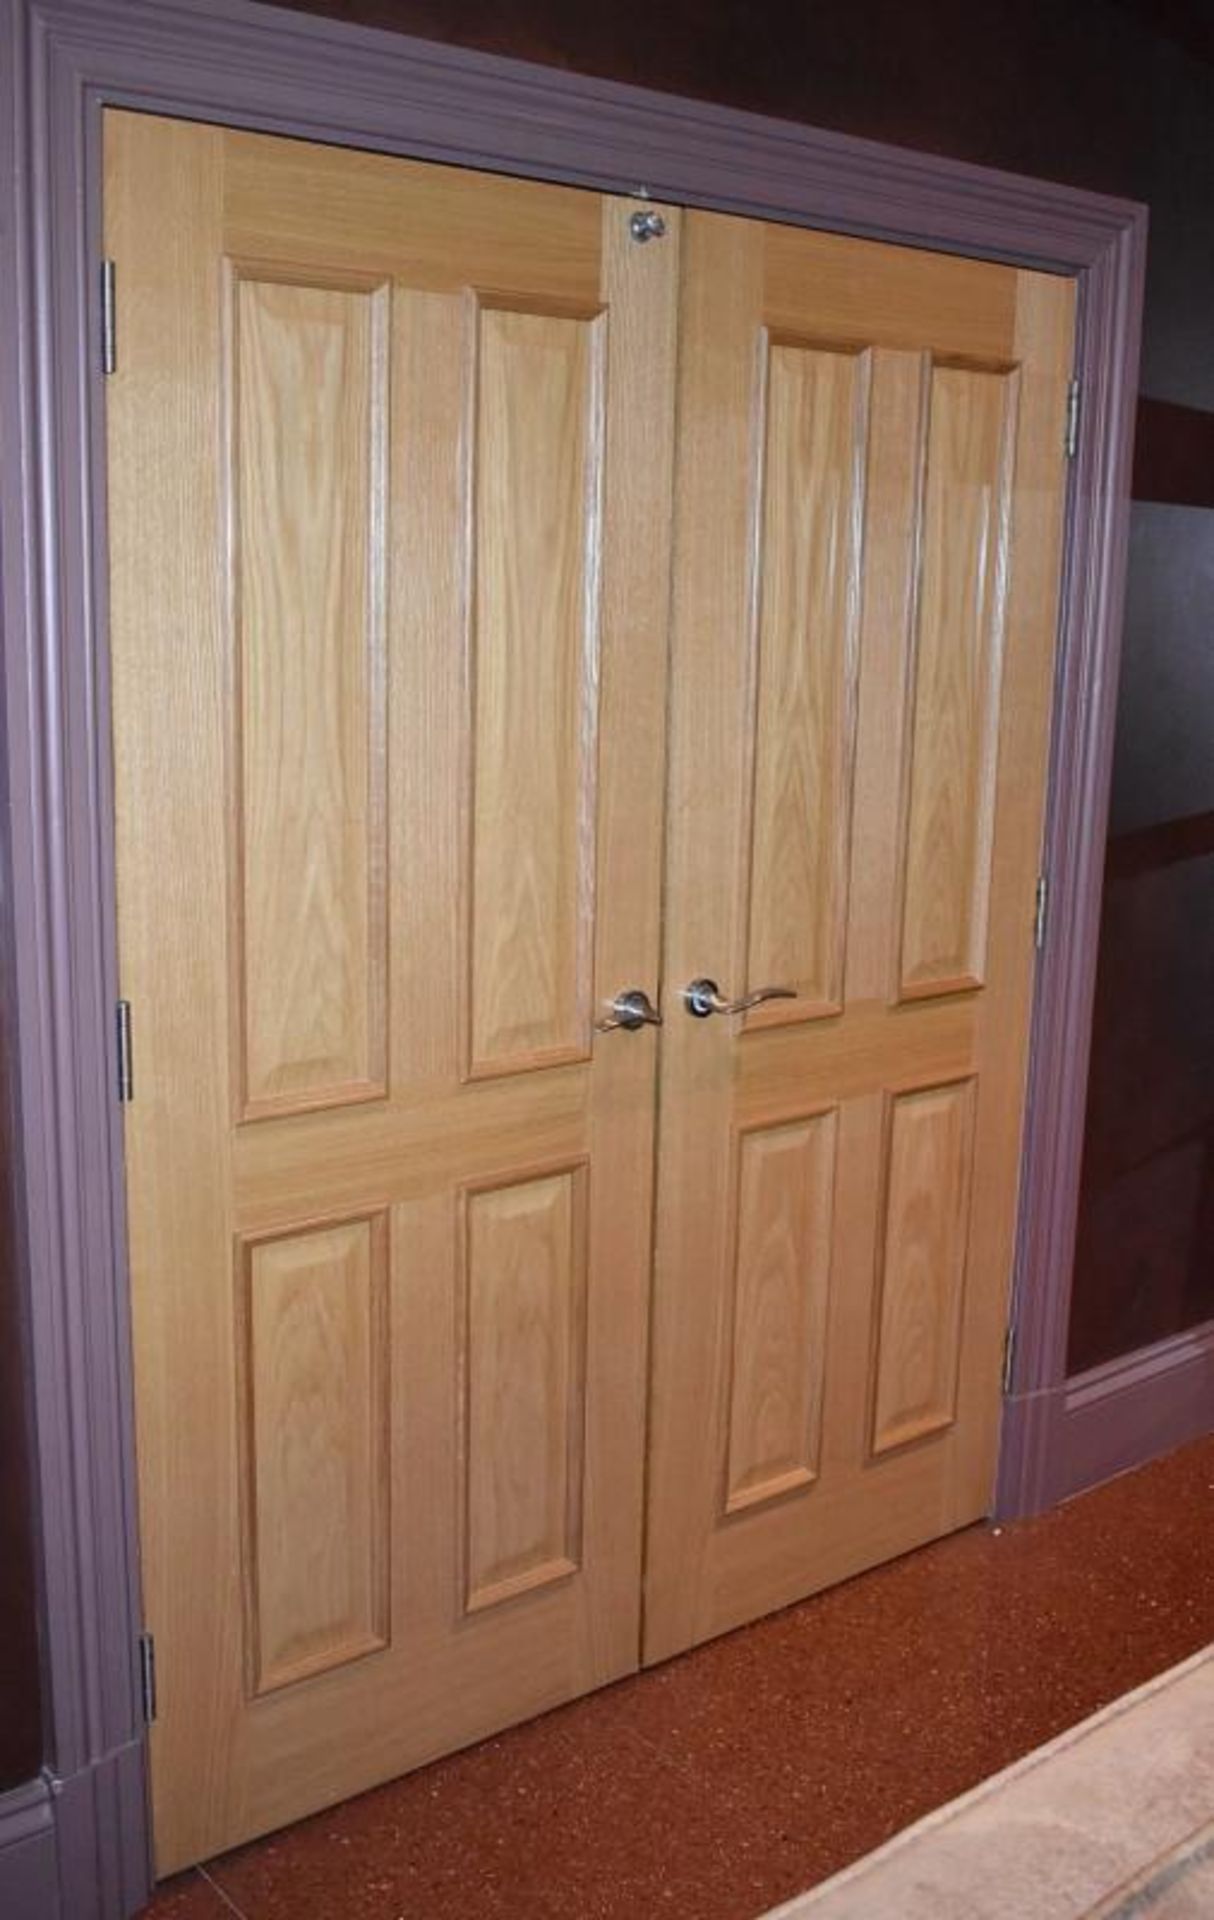 A Pair Of High Quality Internal Wooden Doors - Dimensions Of Each: H200 x W75 x 7cm - Ref: ABR016 / - Image 2 of 5